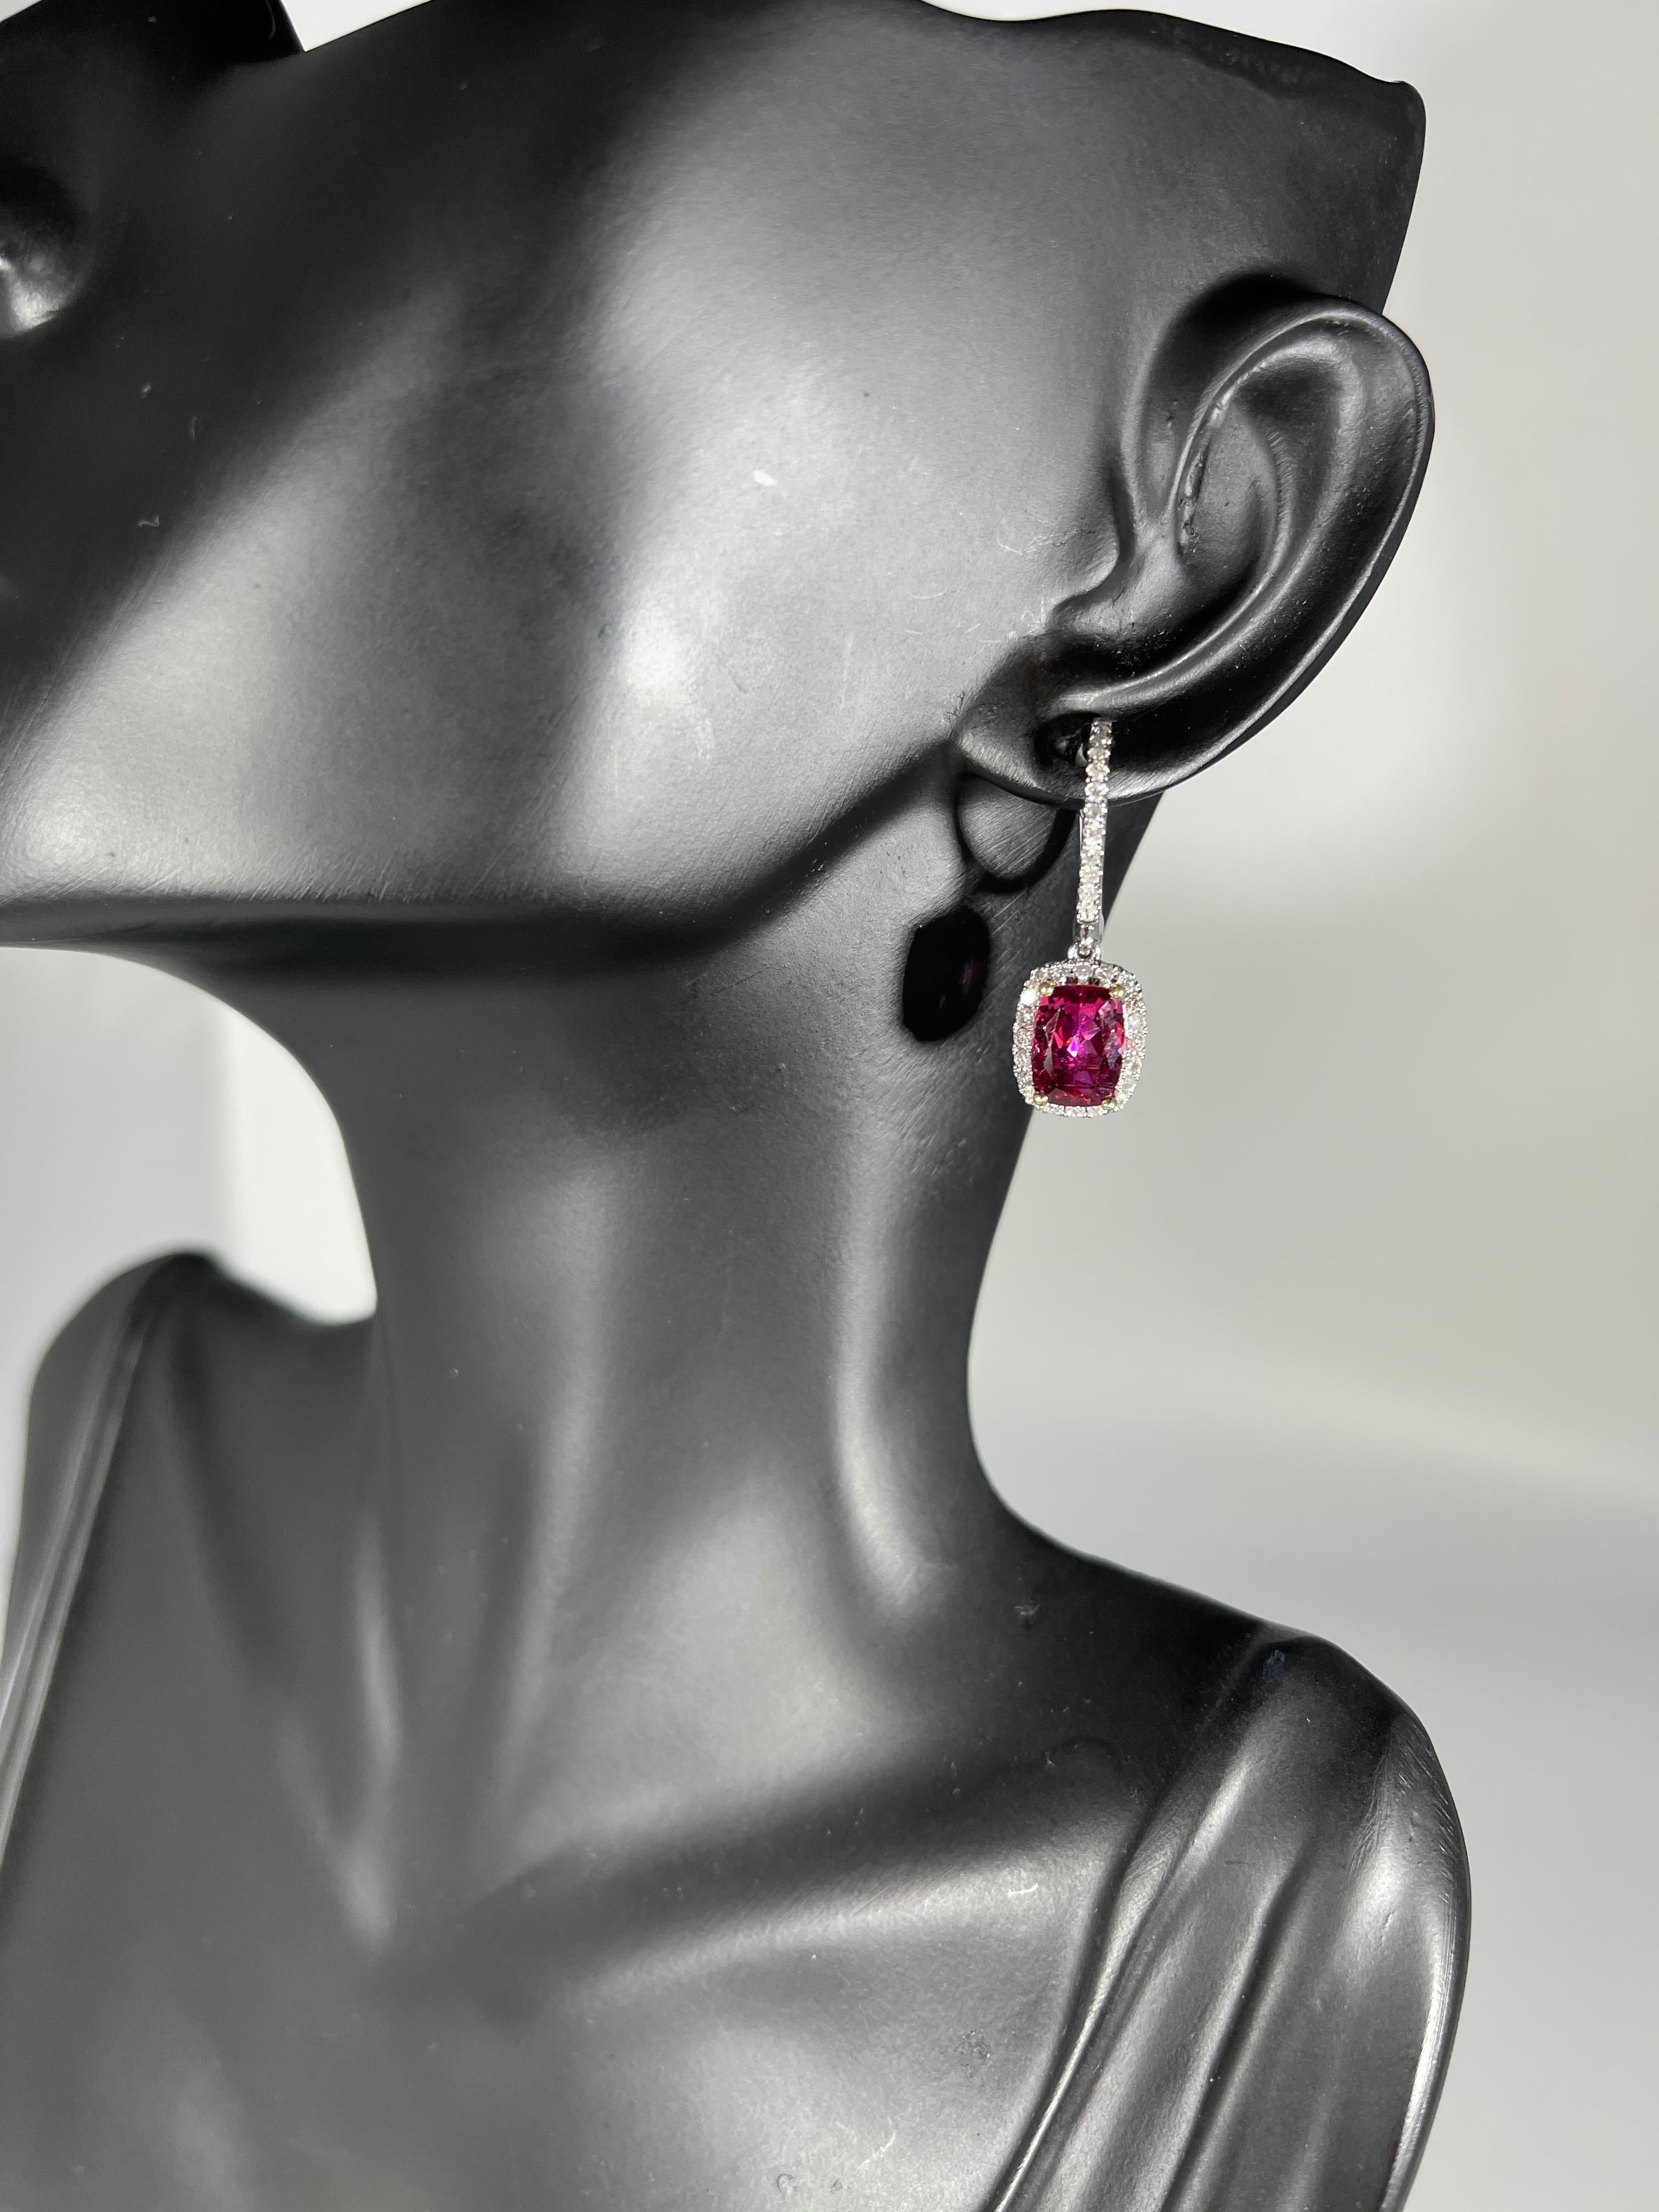 
Designer Effy's Natural Pink Tourmaline and Diamond Dangling Earrings 14 Karat White Gold
Post Earrings with Small Huggies on the top . 
This exquisite pair of earrings are beautifully crafted with 14 karat gold .
Weight of 14 K gold 4.6 grams
Fine